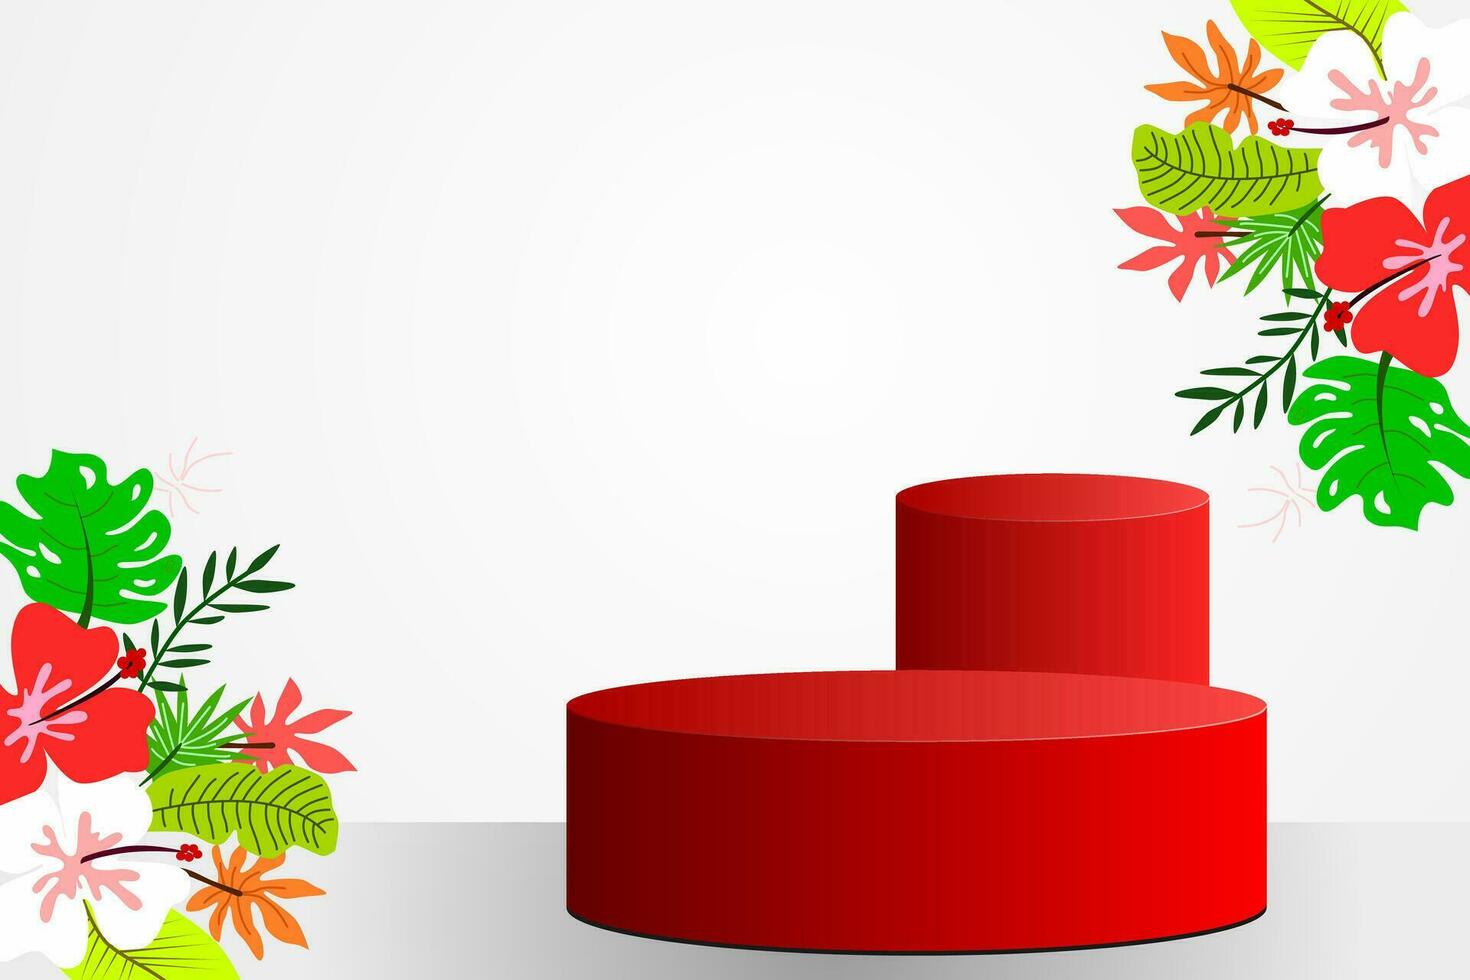 Exclusive 3D minimal mockup scene. Two red podiums shape with a tropical leaves and flowers on the soft grey background for show product display. 3D vector illustration.